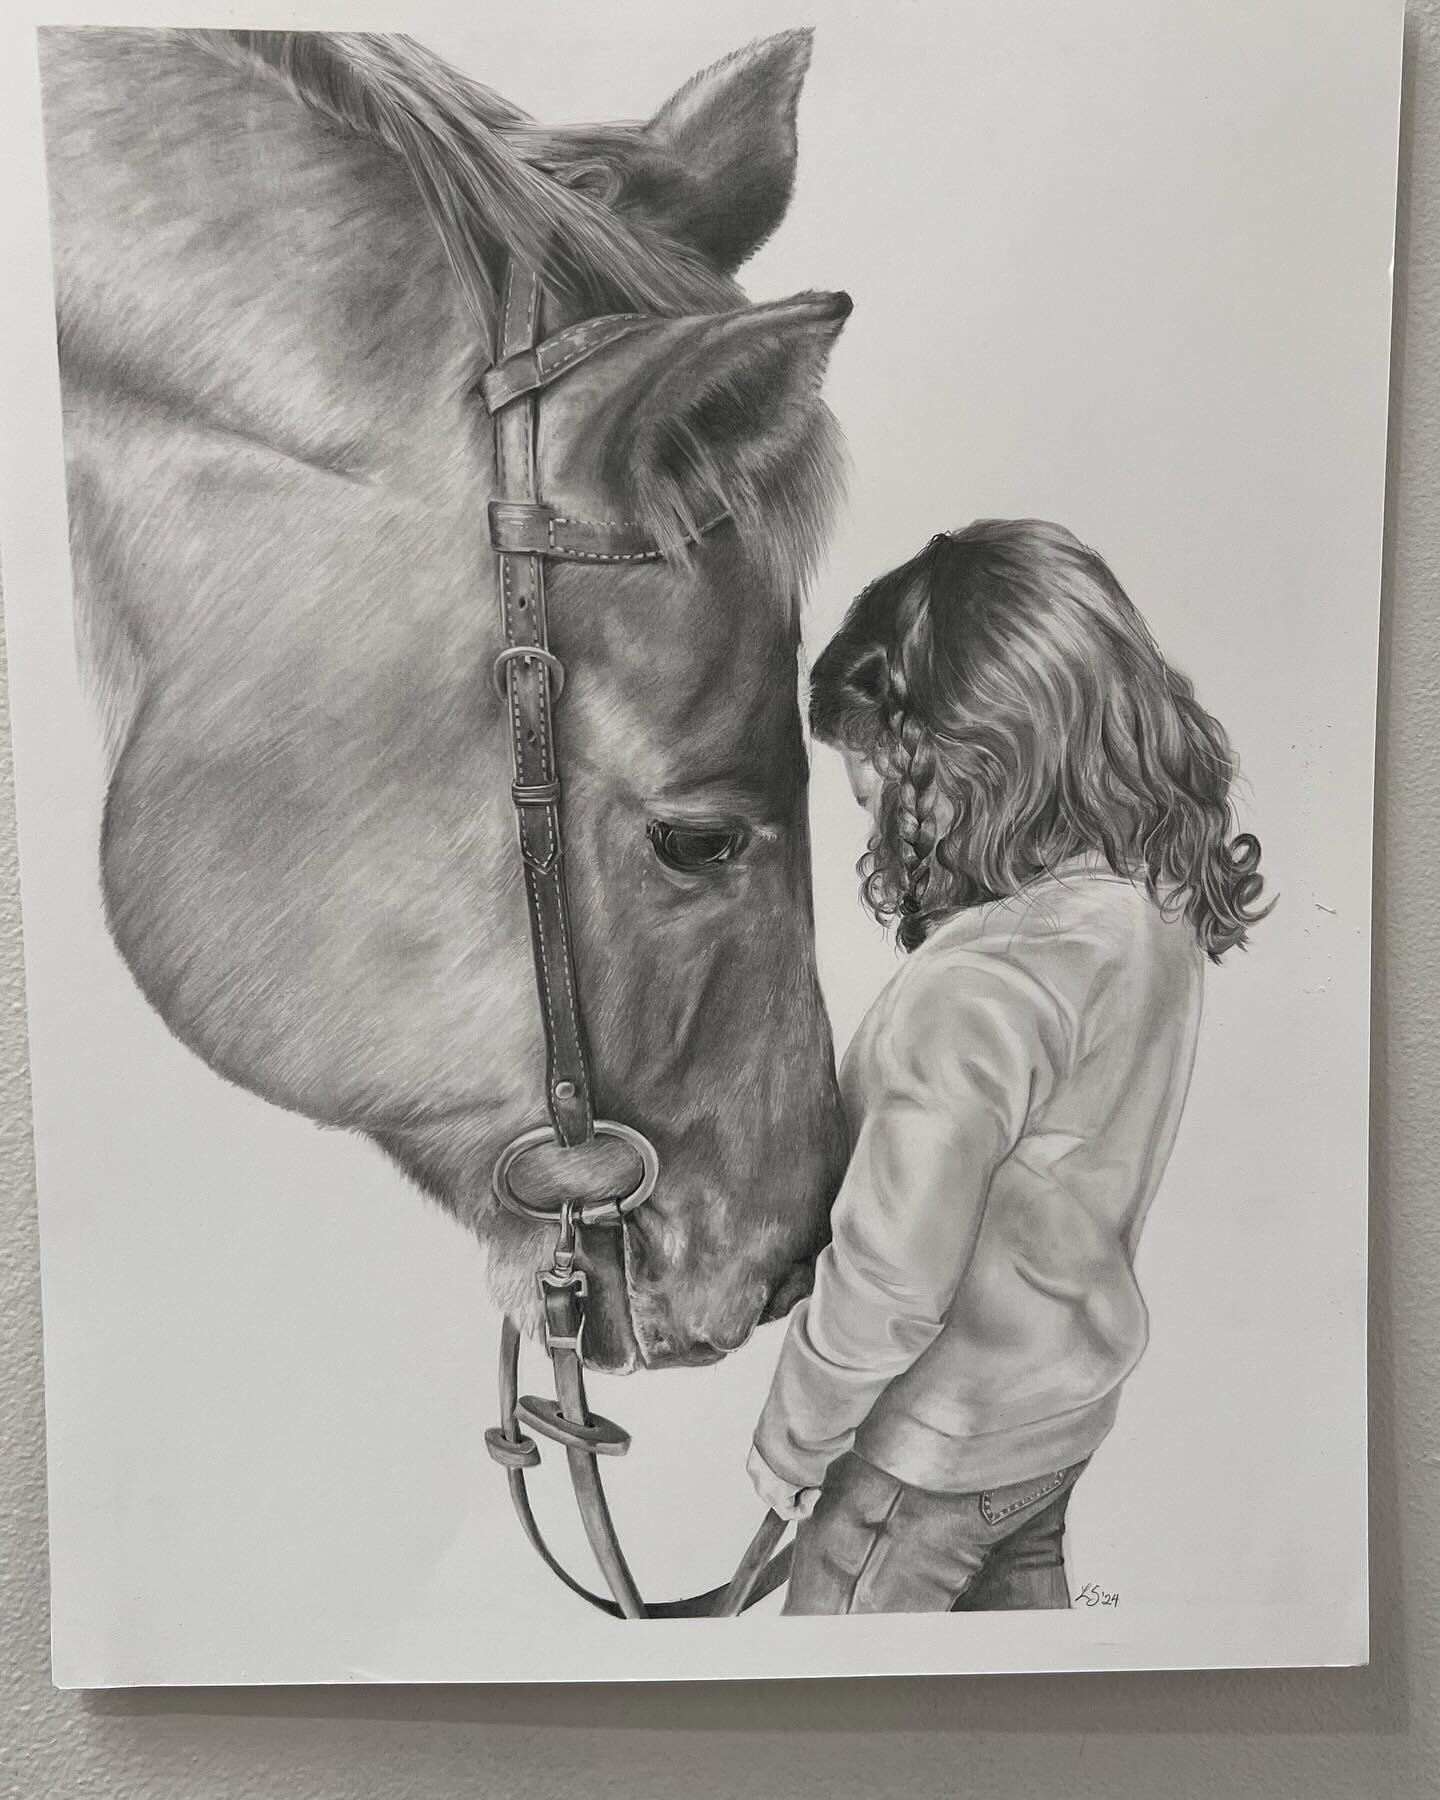 Final complete &amp; off to CA ✔️✏️
Swipe to see the reference photo! 

Loved how this special piece turned out 🙌🏻❤️
Graphite commission 16x20